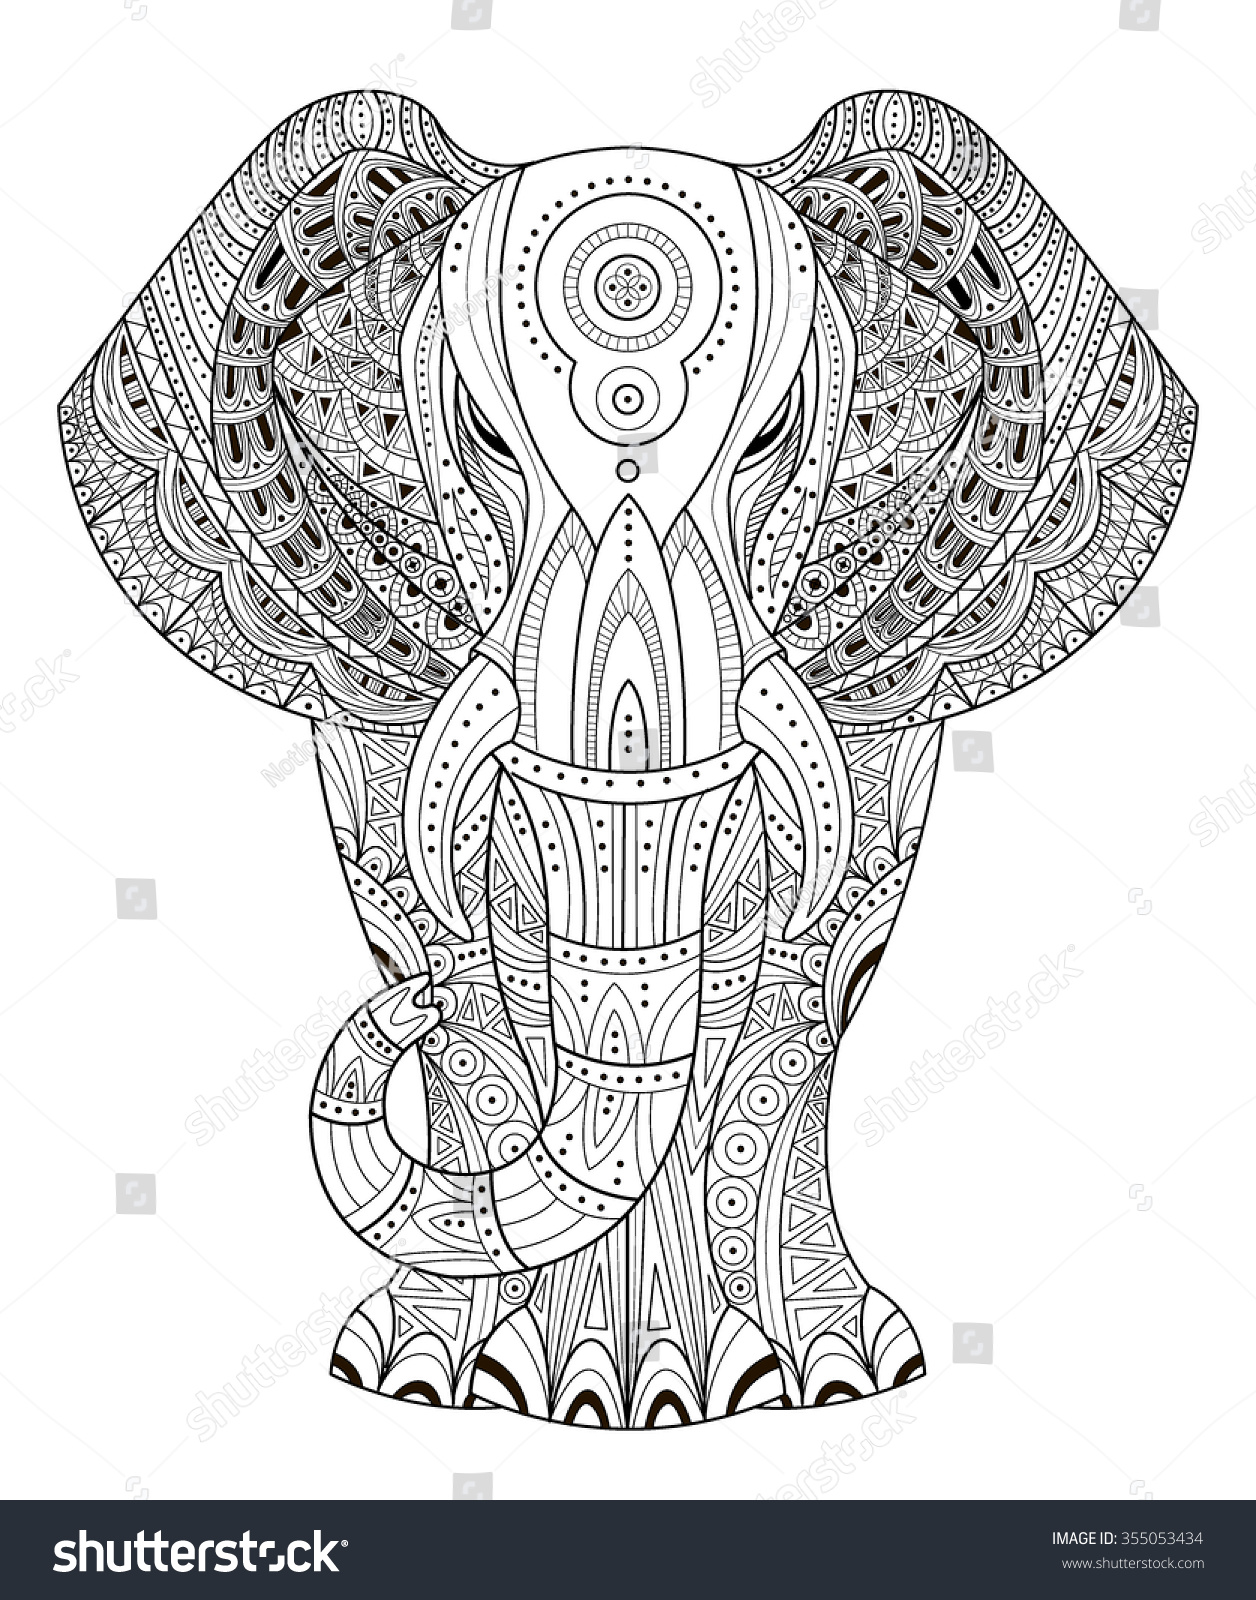 SVG of Ornated Elephant Vector illustration in Zentangle style. Hand drawn design elements. svg